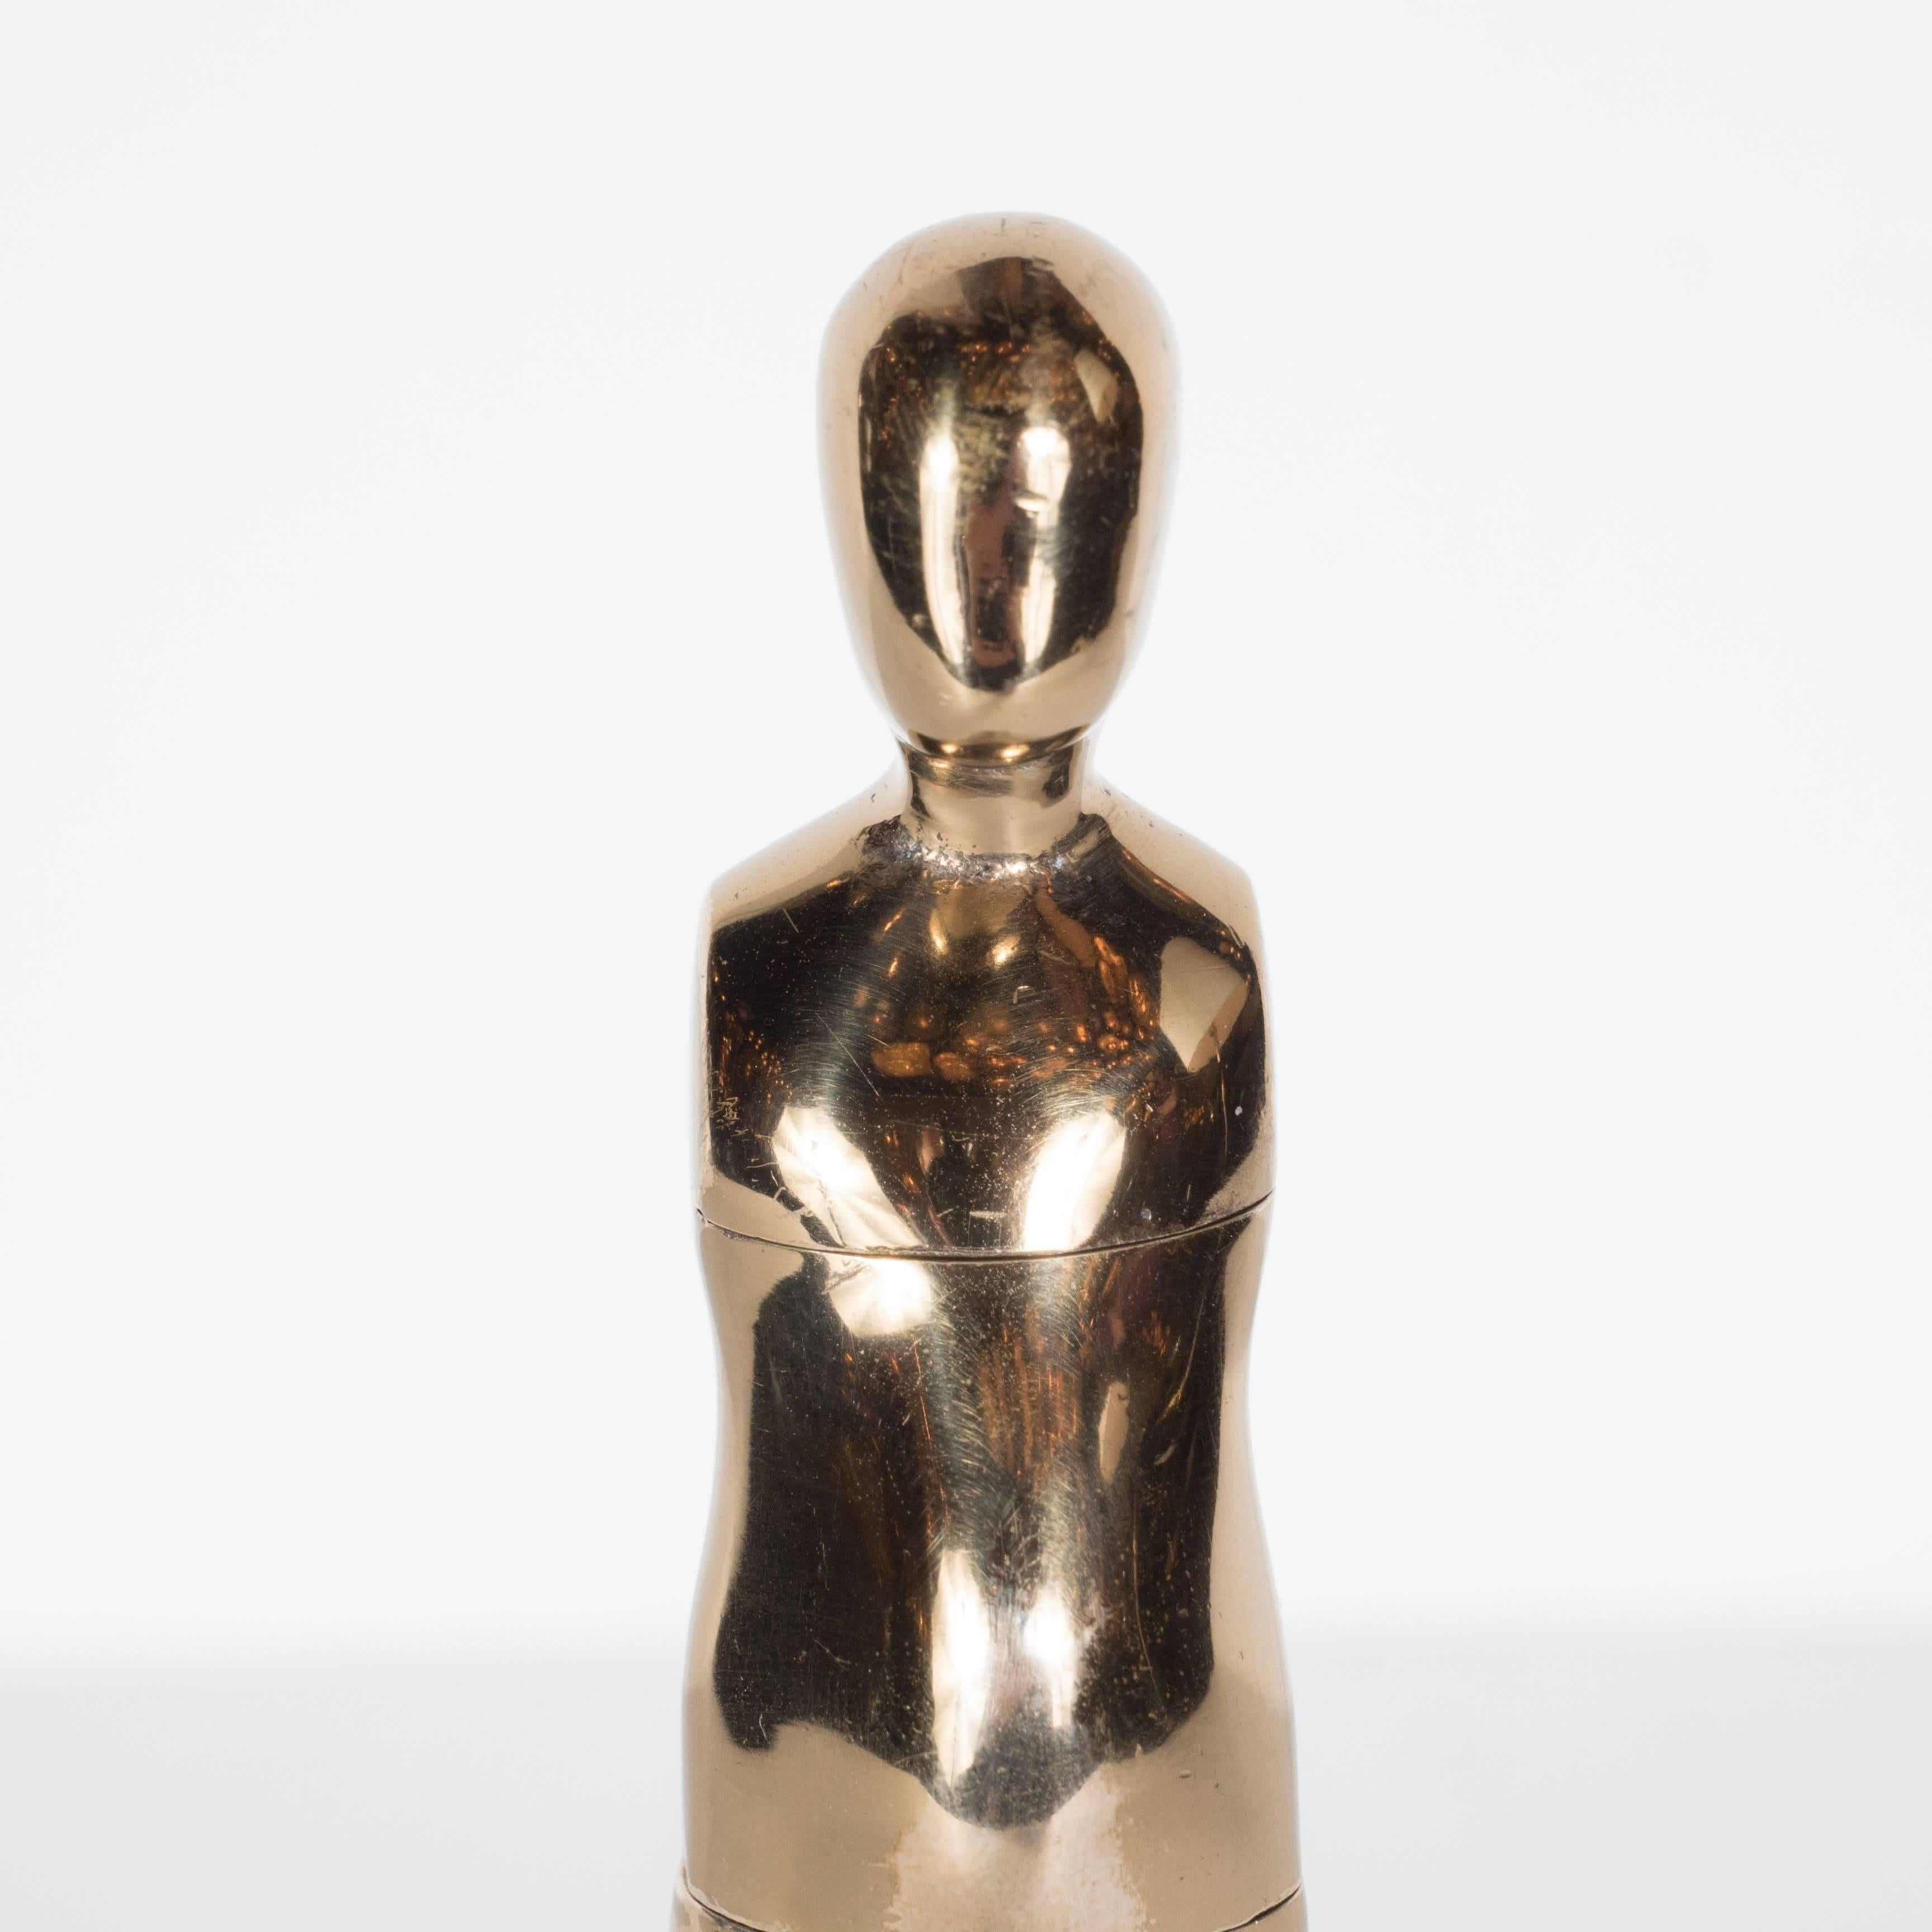 This compelling sculpture, executed in brass circa 1960, represents a study for Ernest Tino Trova's most iconic body of work, 